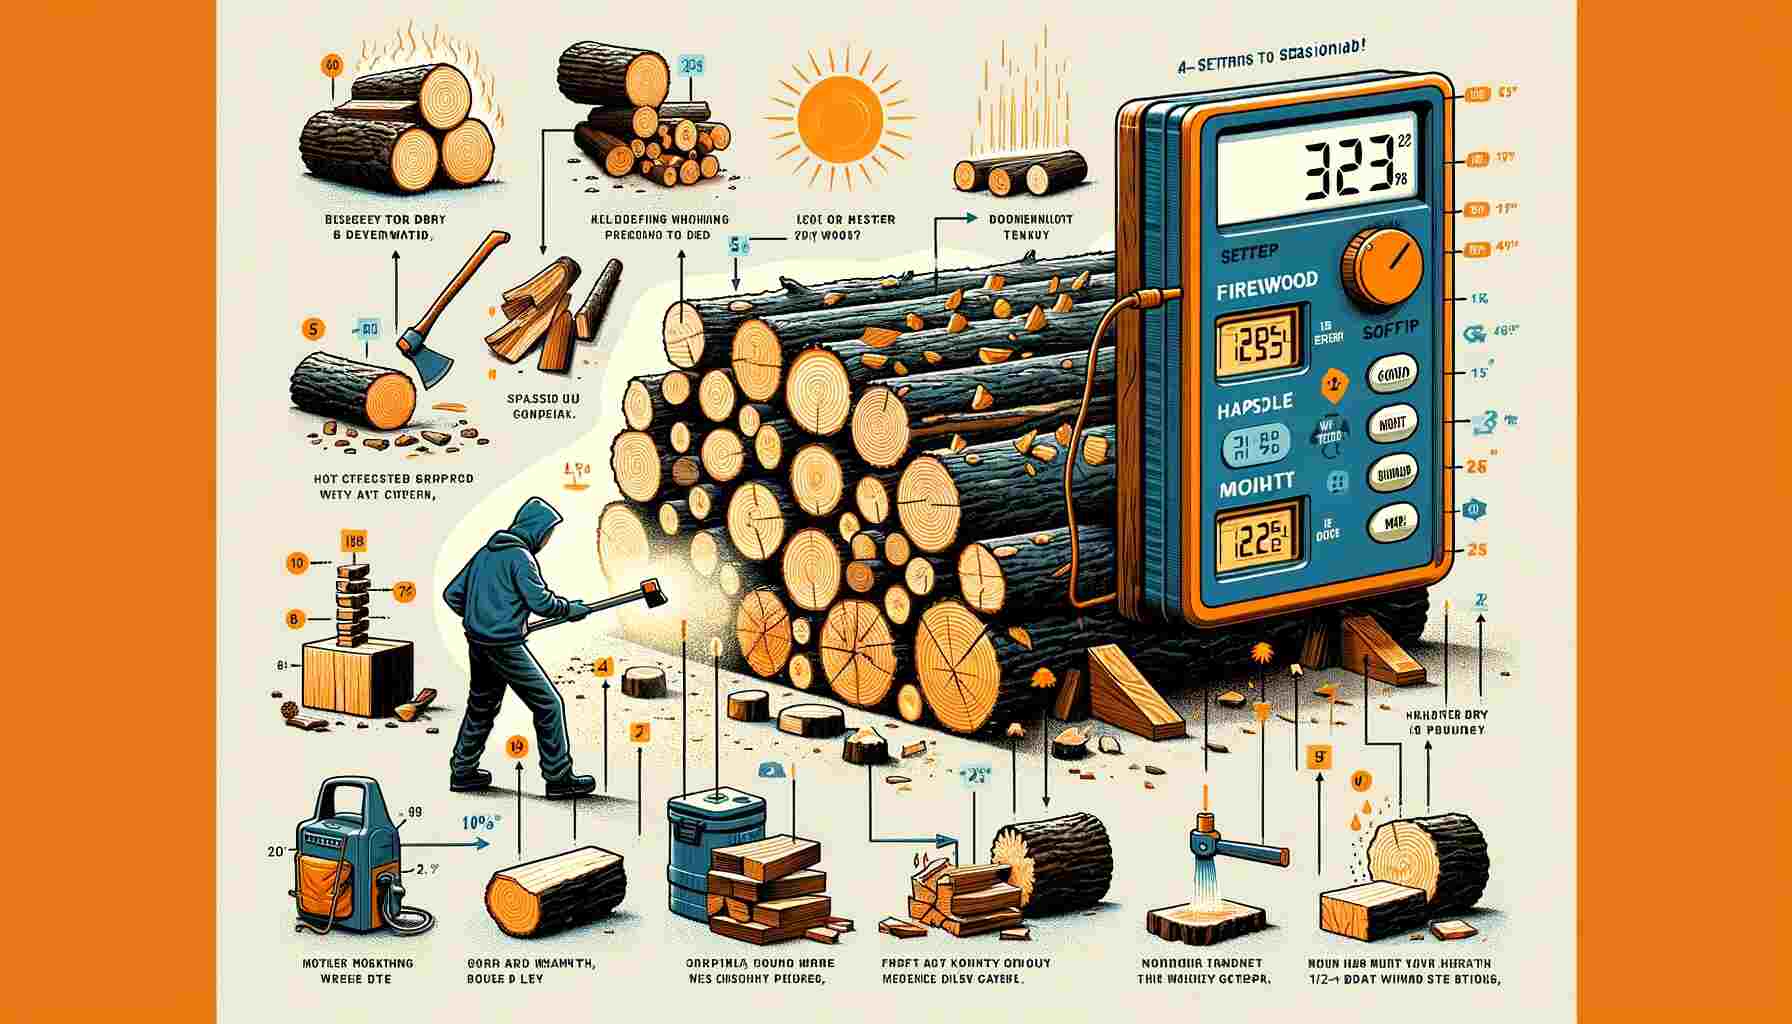 Here is an image that visually represents the step-by-step process of drying firewood quickly, covering all the key steps from selecting the right type of wood to testing for dryness.